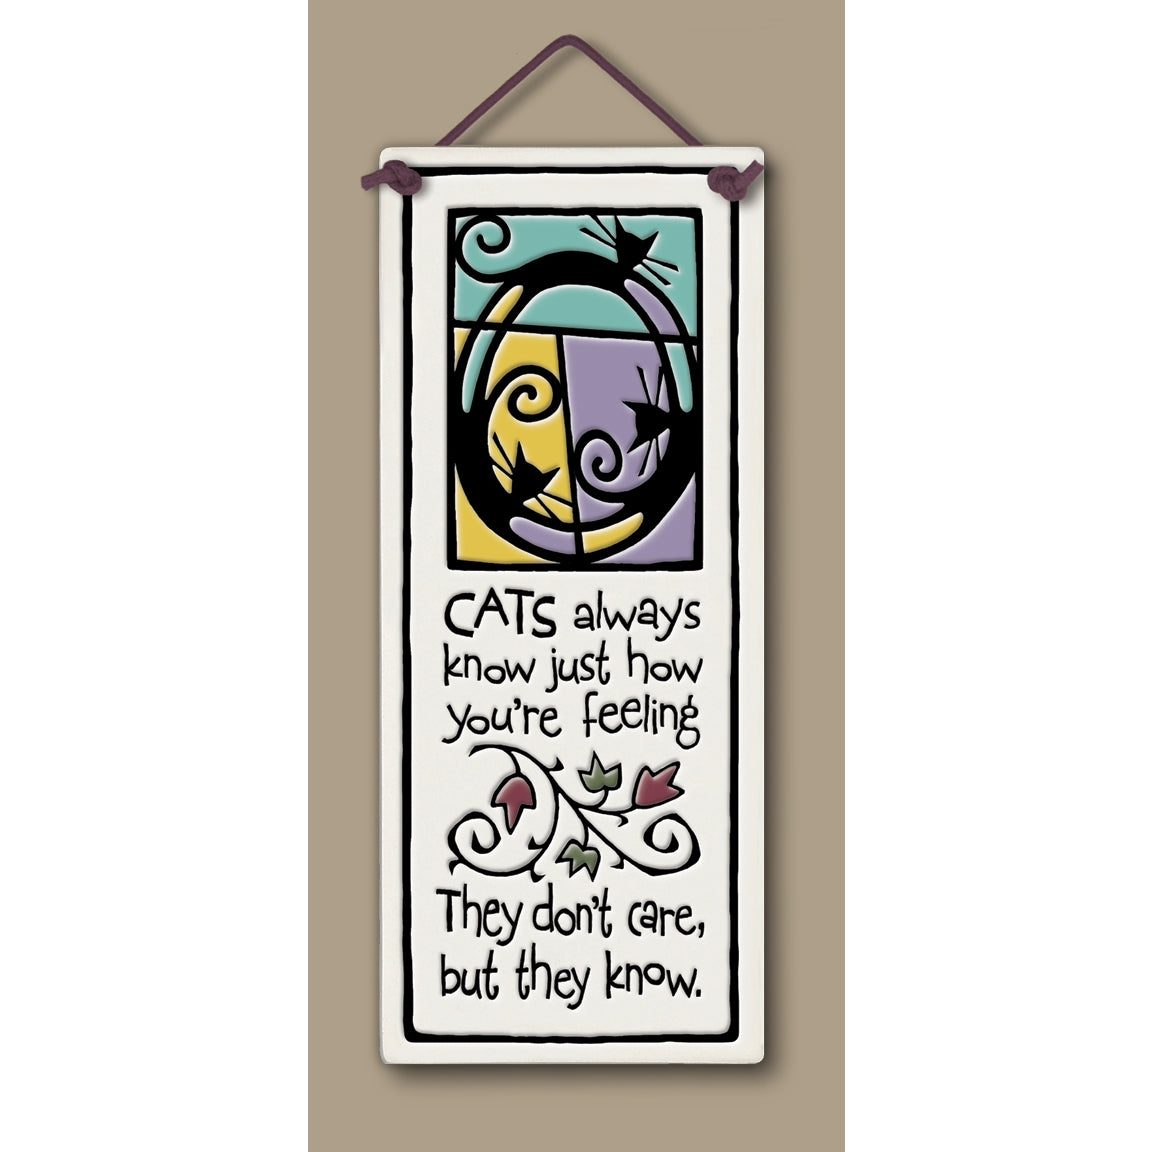 "Cats always know just how you're feeling. They don't care, but they know" Stoneware Plaque